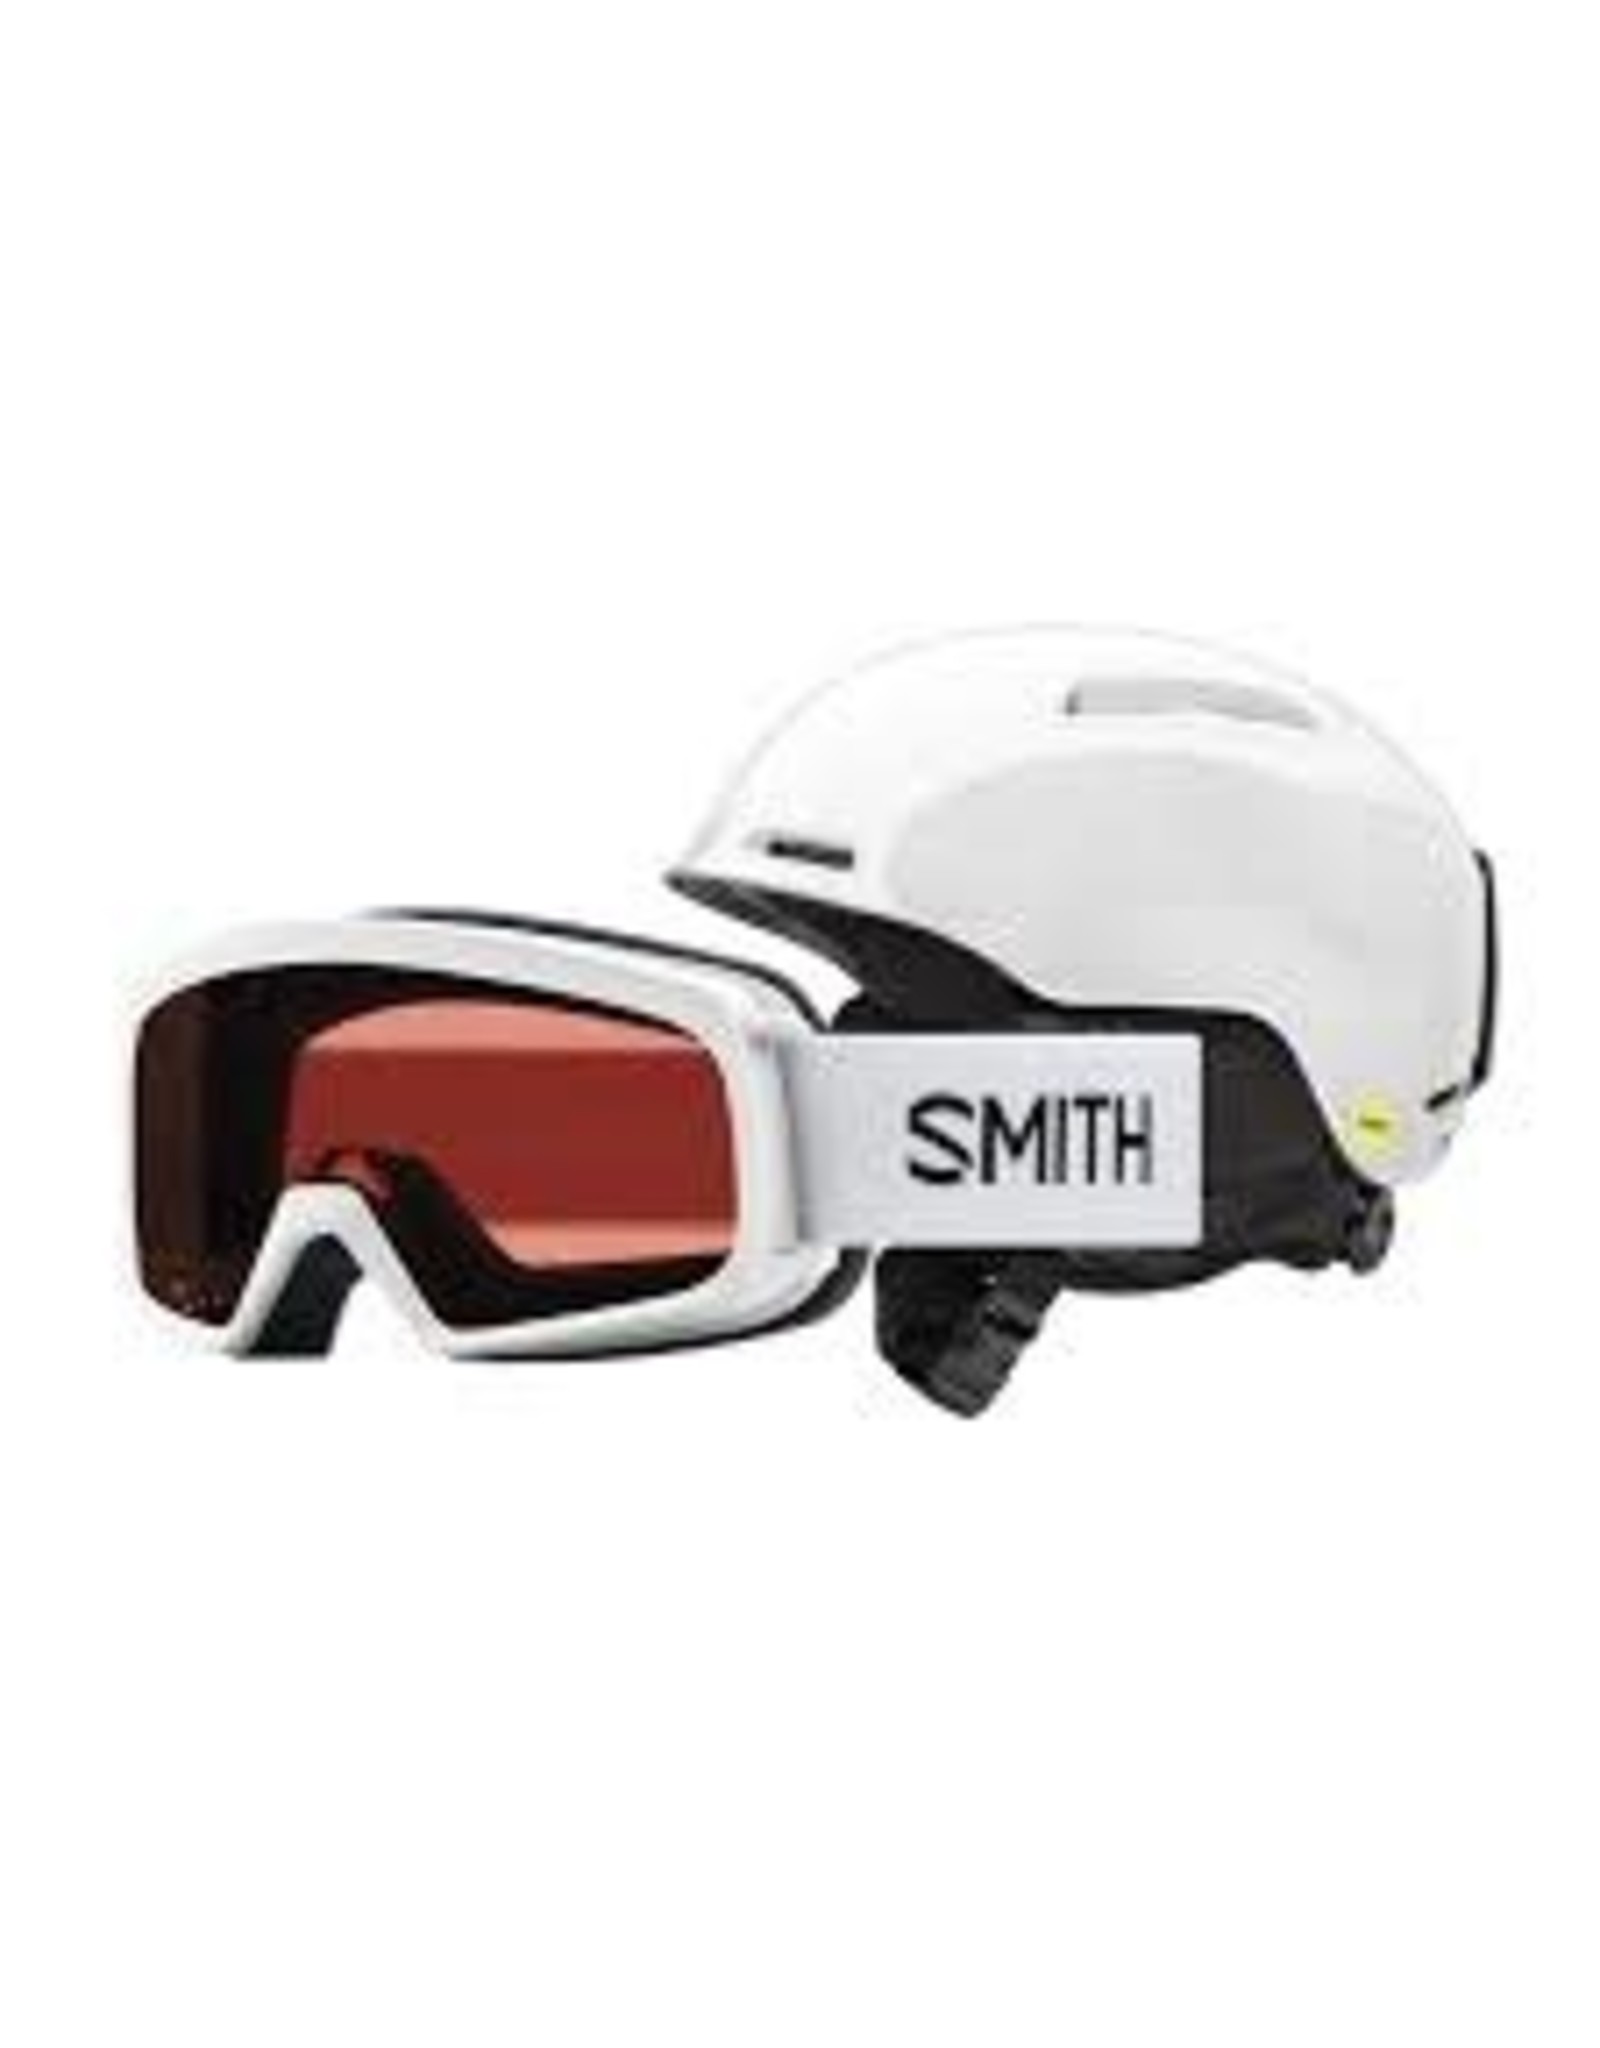 Helmet Smith Glide Jr. MIPS / Rascal Combo - White, Youth X-Small, 48-52cm